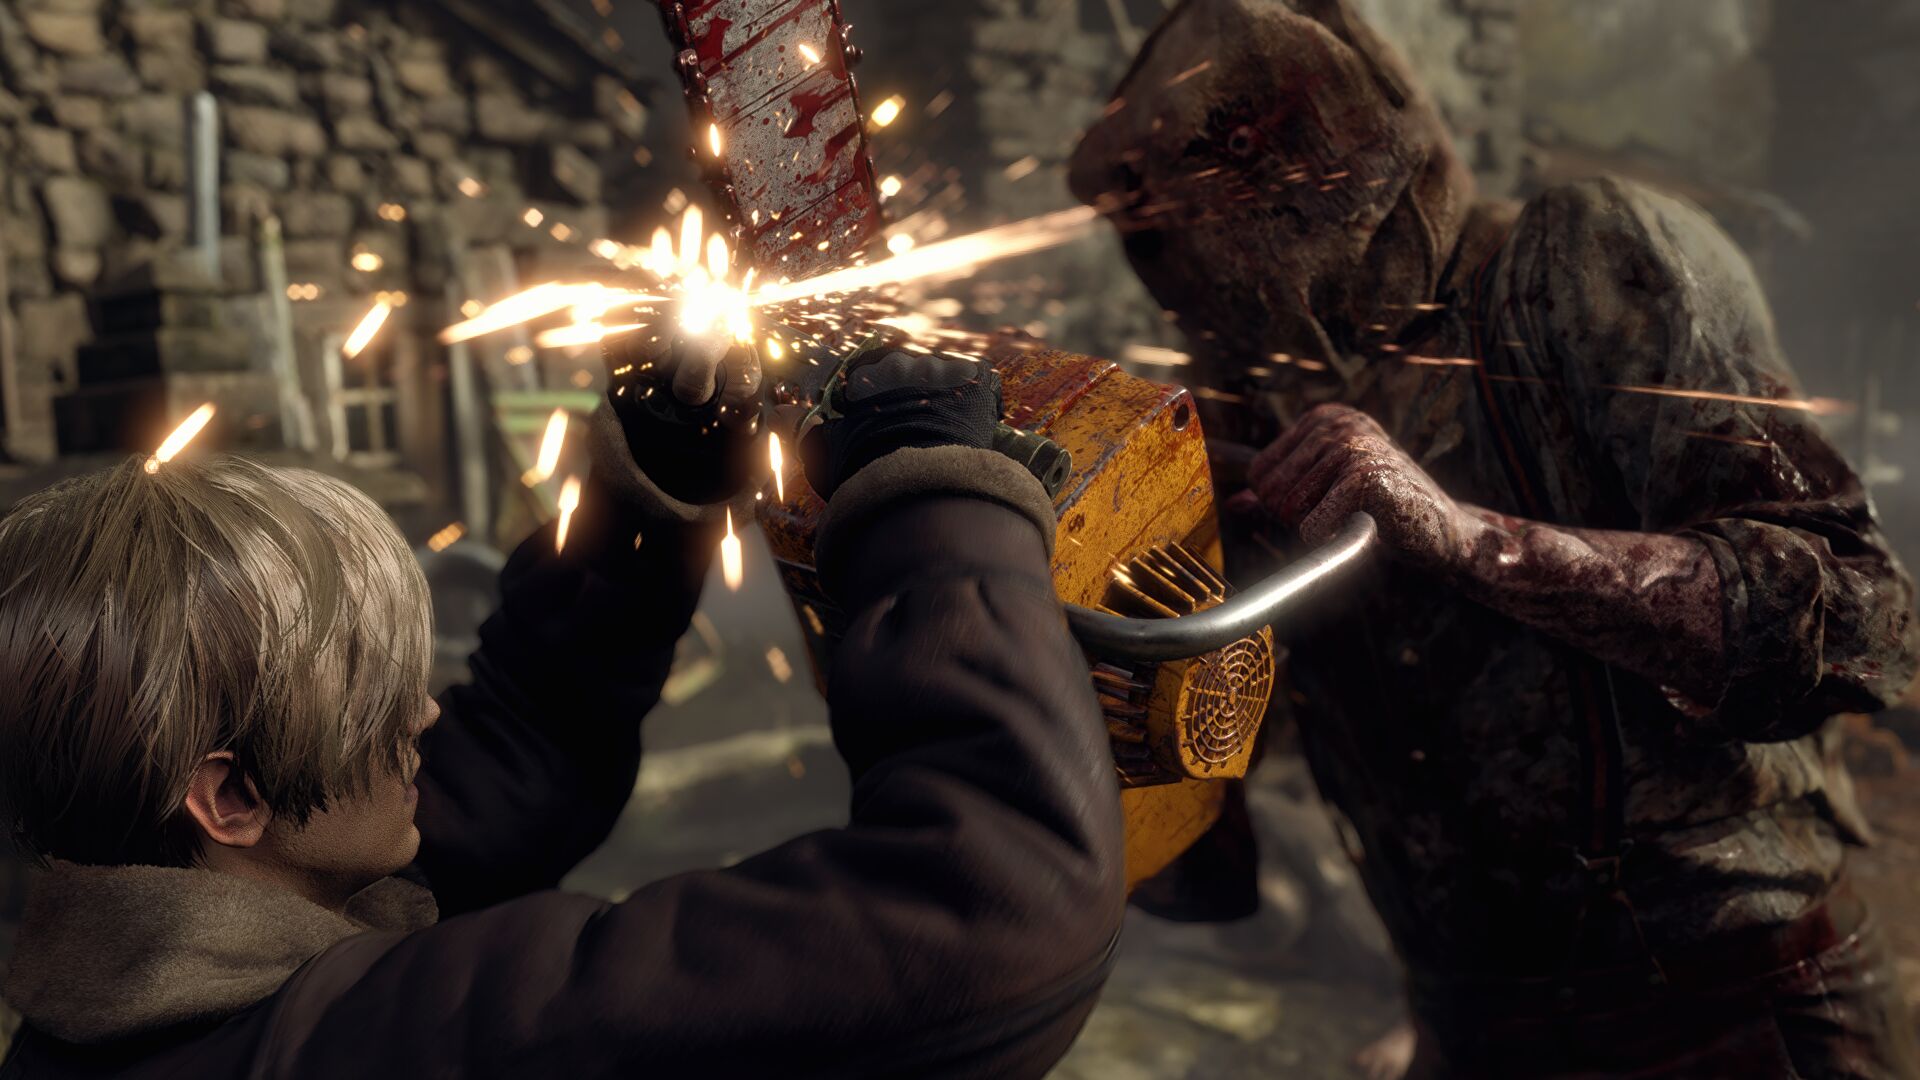 Leon Up Agains the Chainsaw Villager in the Upcoming Resident Evil 4 Remake